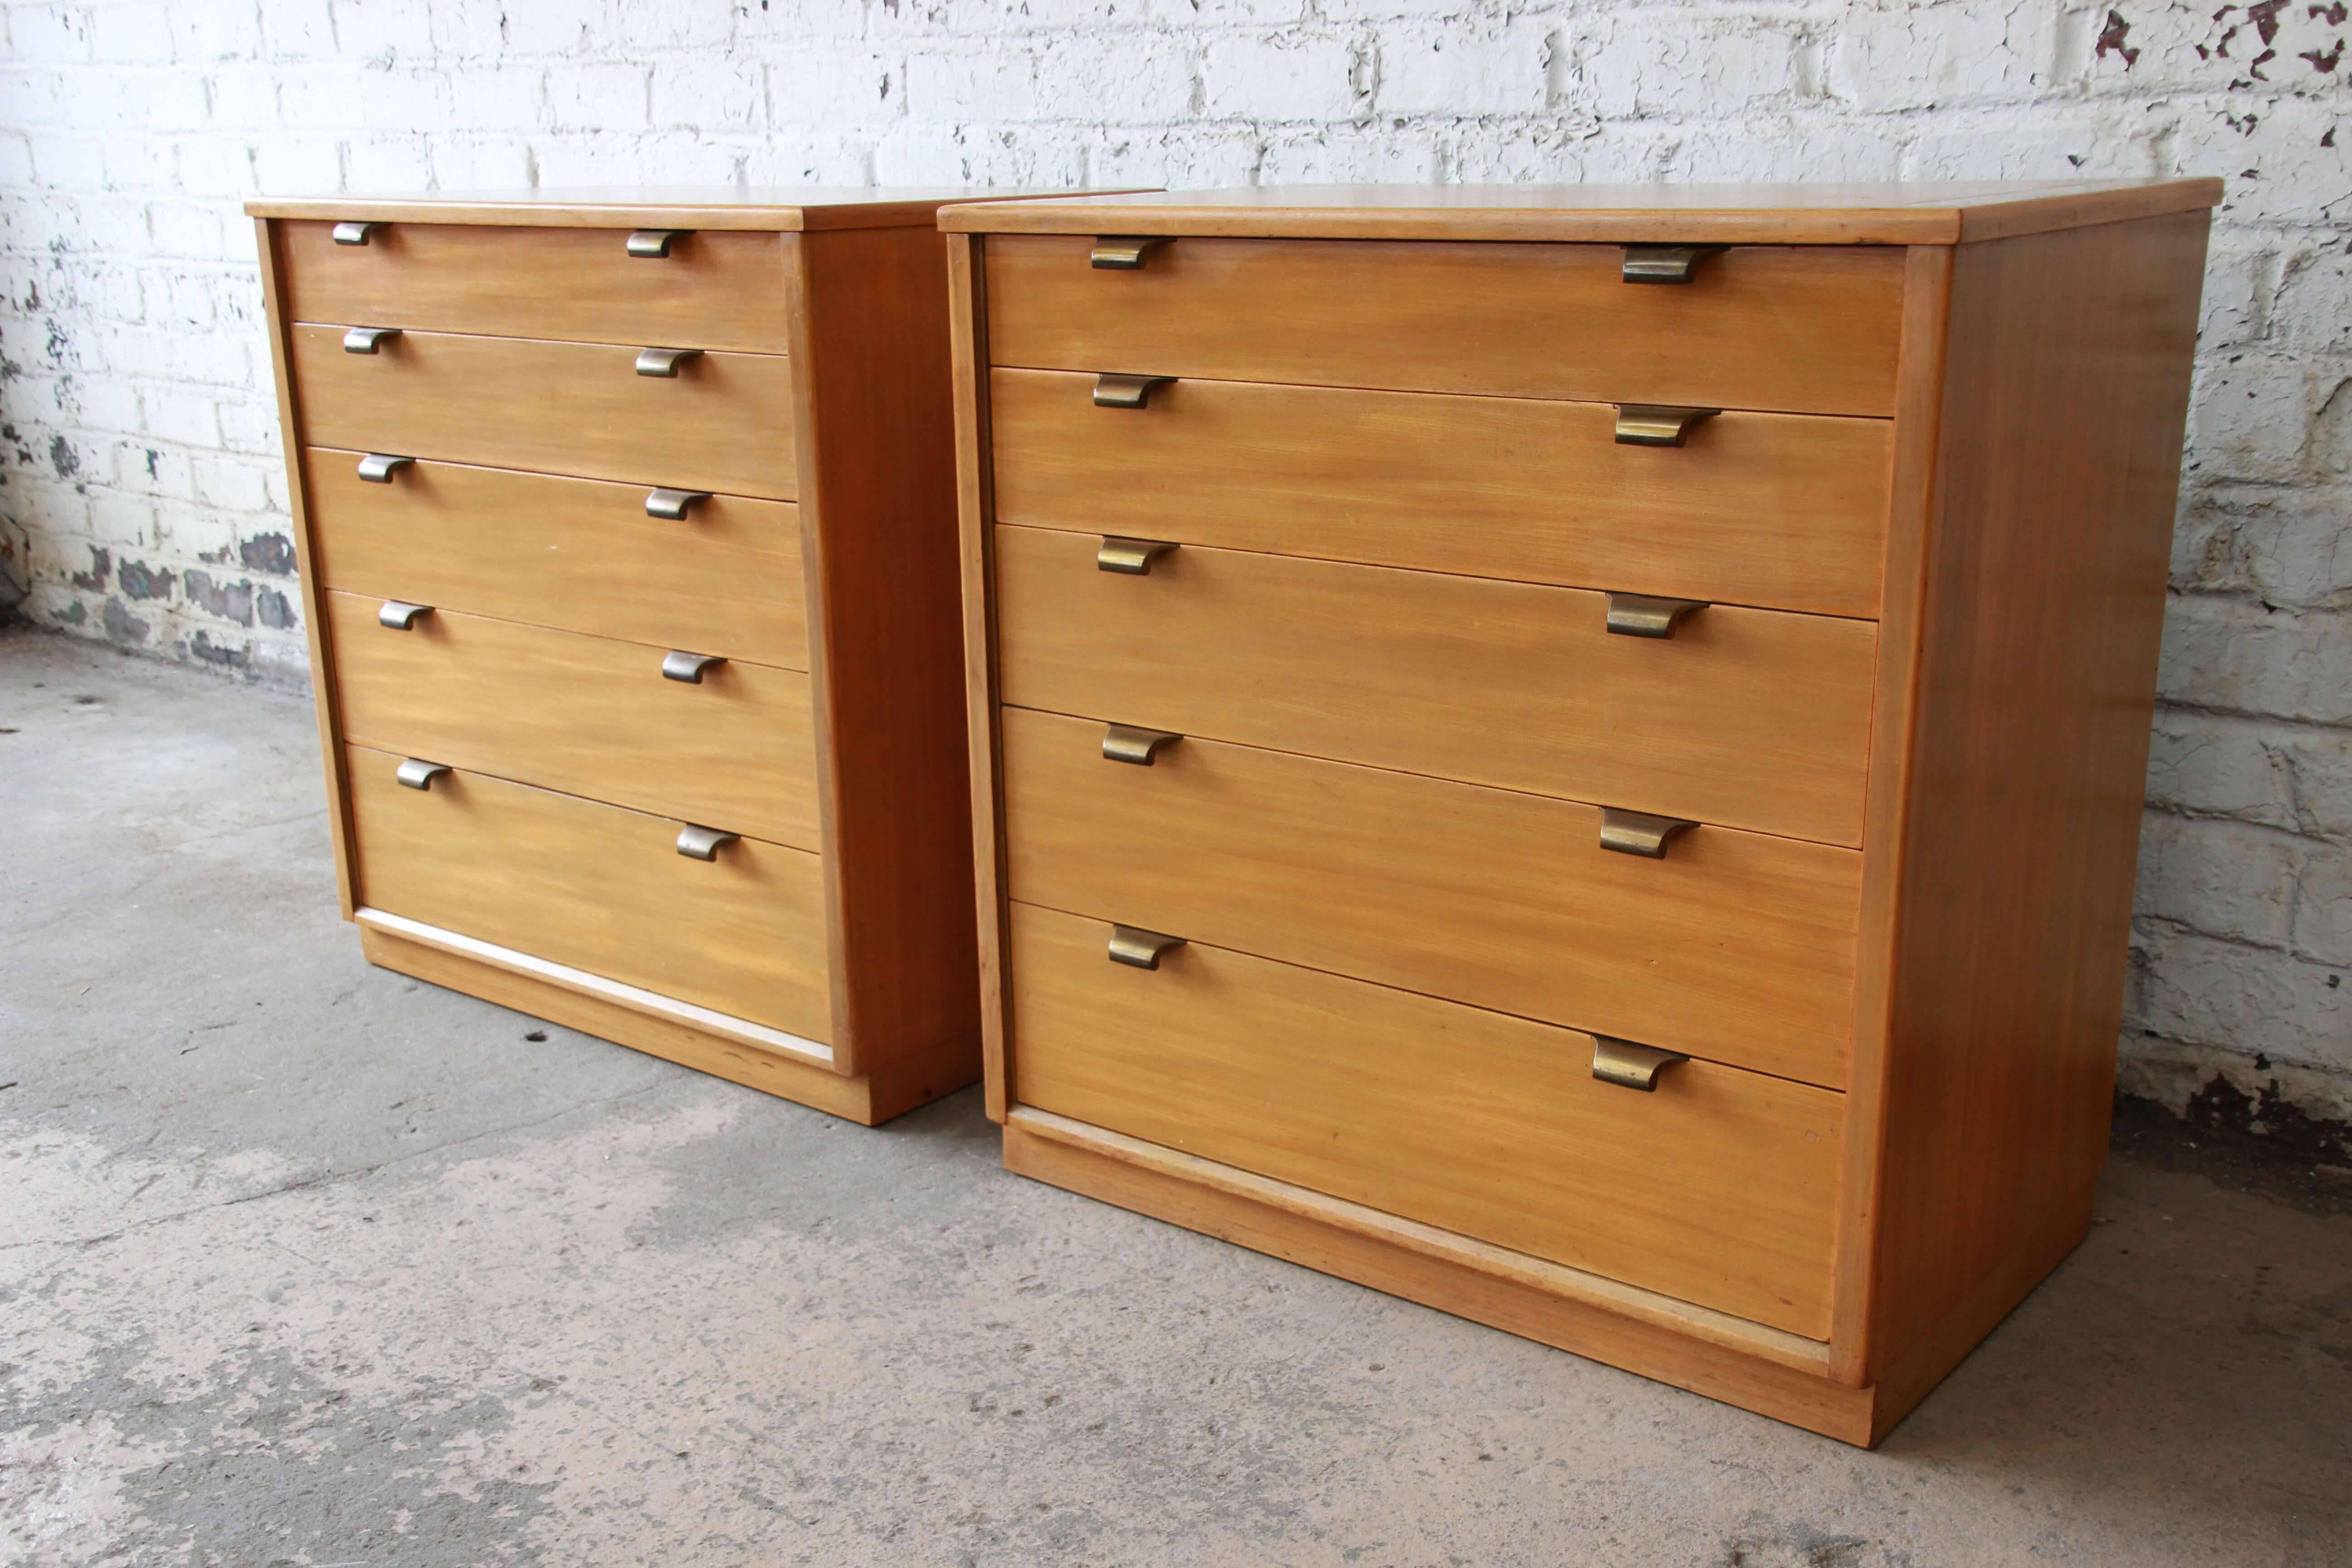 Offering a very nice and rare pair of Edward Wormley Precedent chests by Drexel. This pair can uniquely be a set of nightstands or chests offering five large drawers for ample storage. With brass pulls this pair offers clean Mid-Century Modern lines